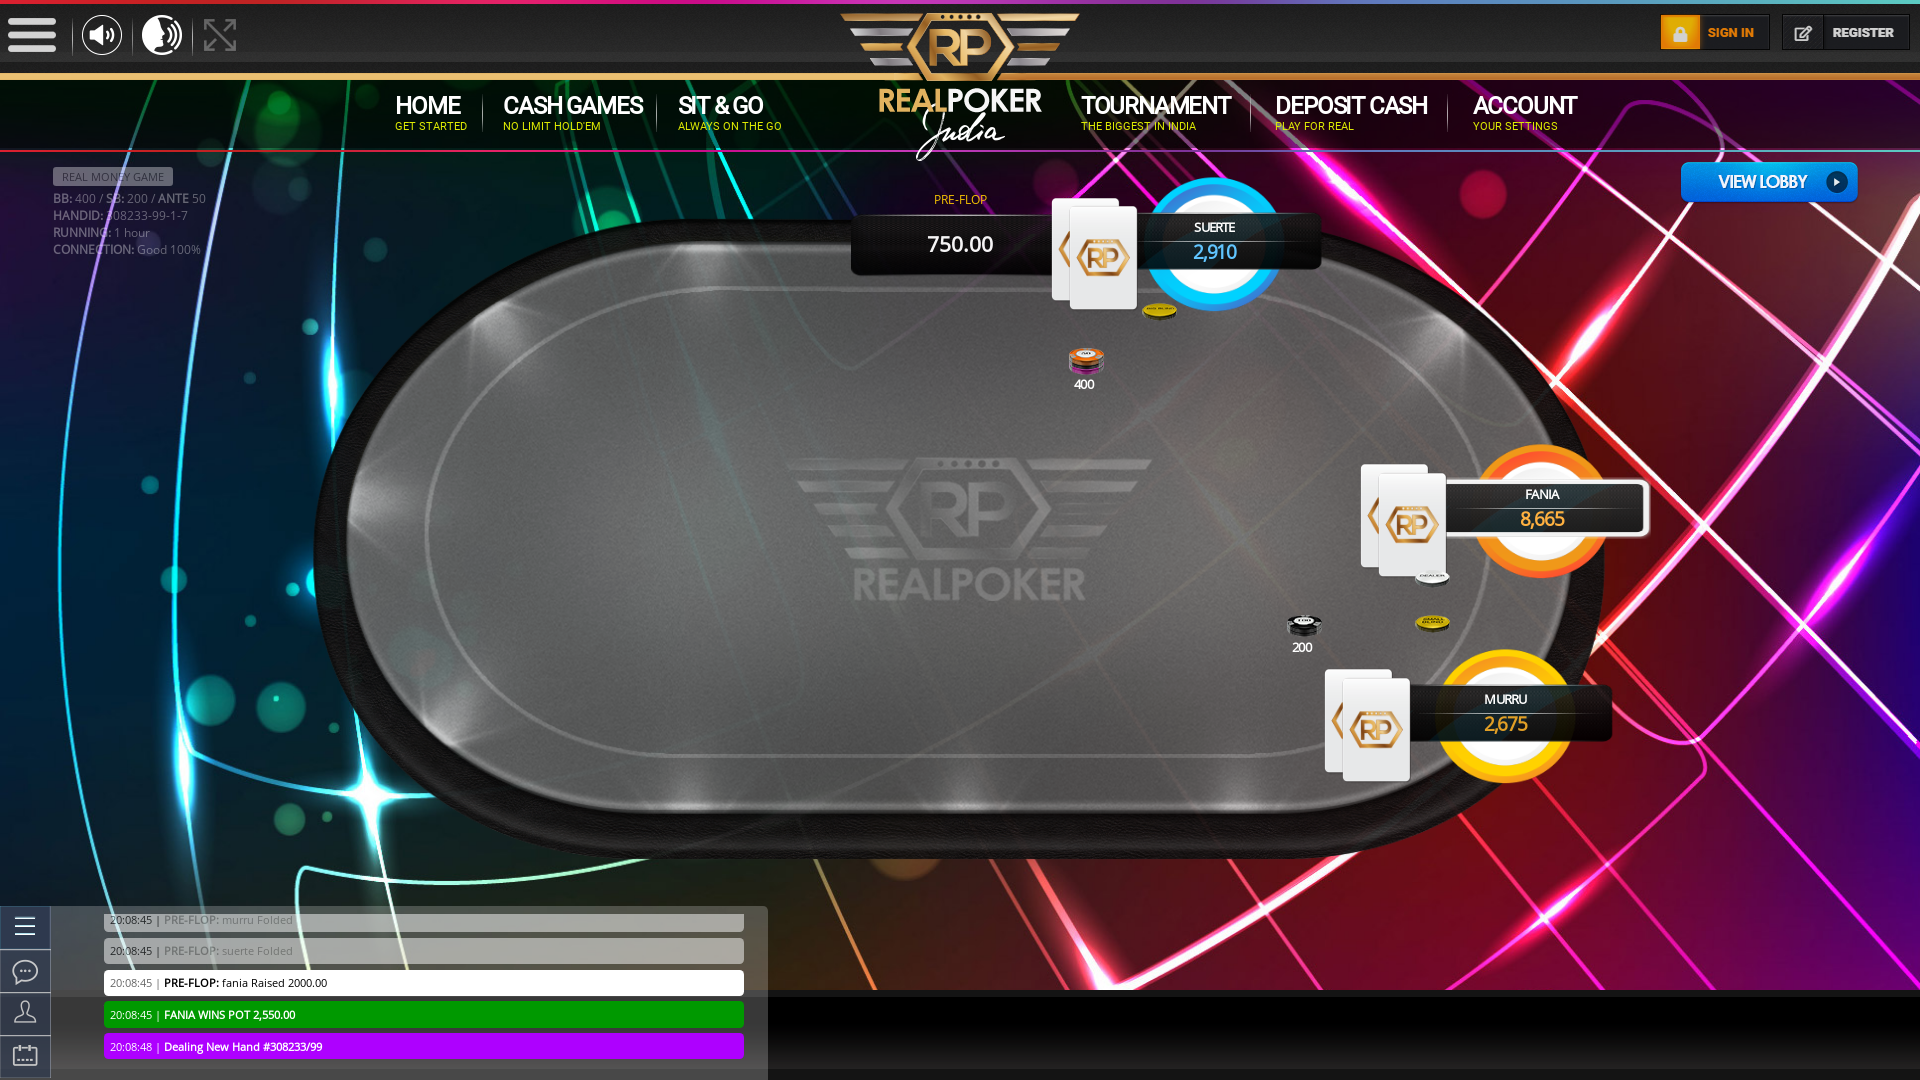 Howrah, Kolkata online poker game on a 10 player table in the 62nd minute of the game